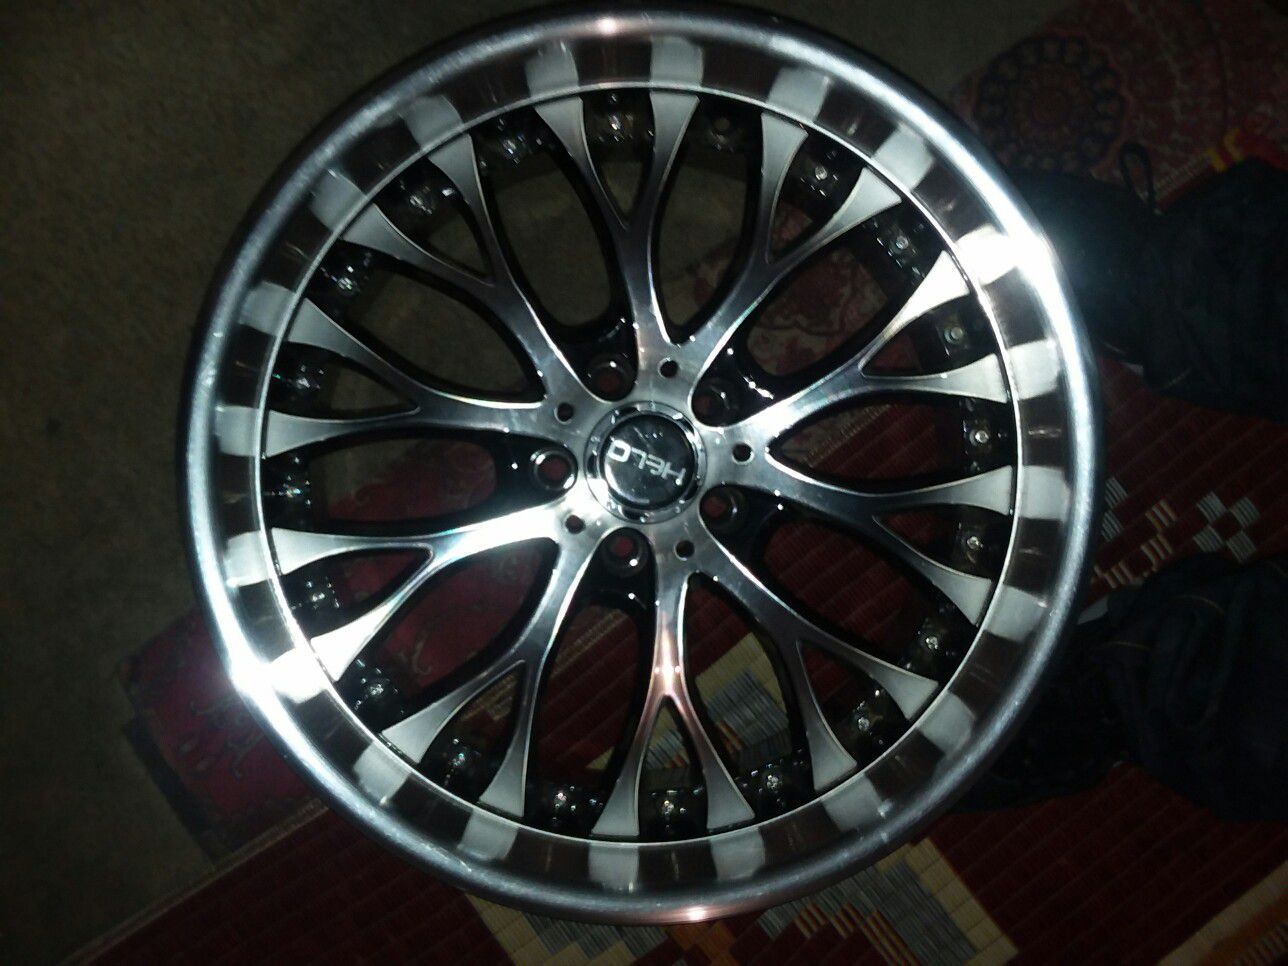 Helo machine face rims chrome glossy black 20inches 3.5mm offset 04 Altima 2.5s new not in the box